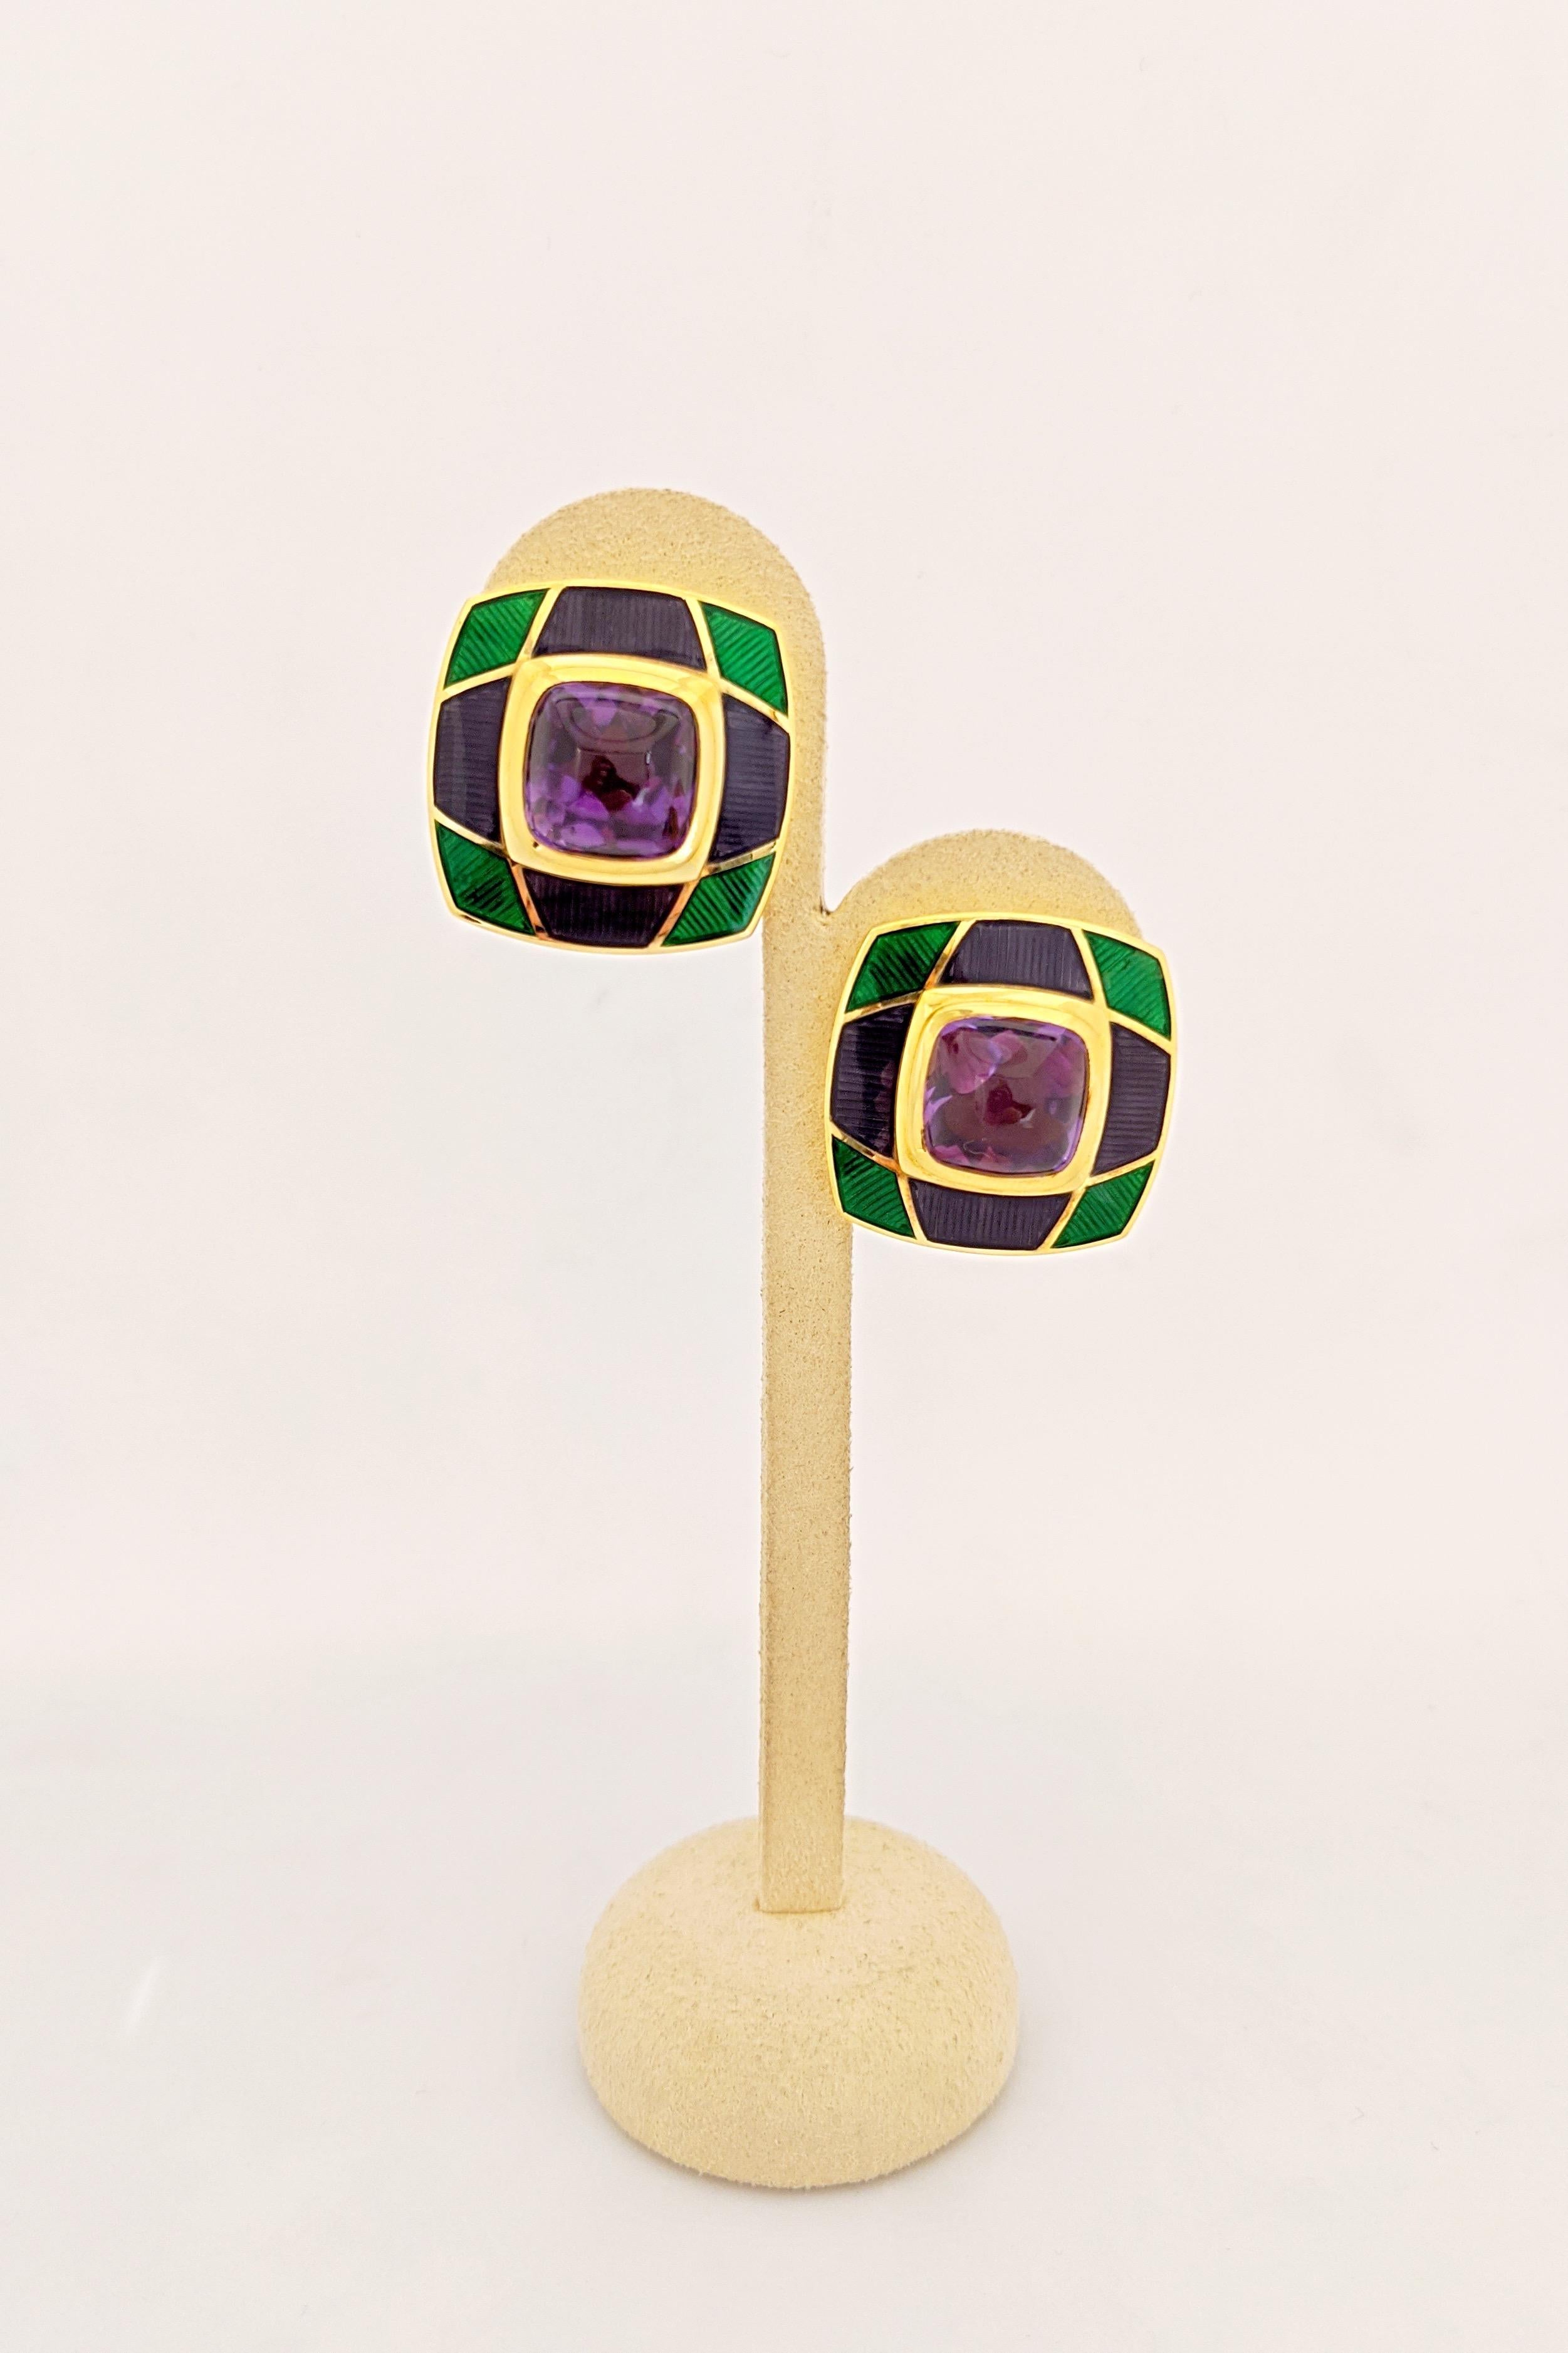 Contemporary Leo de Vroomen 18 Karat Gold Earrings with Amethyst and Purple and Green Enamel